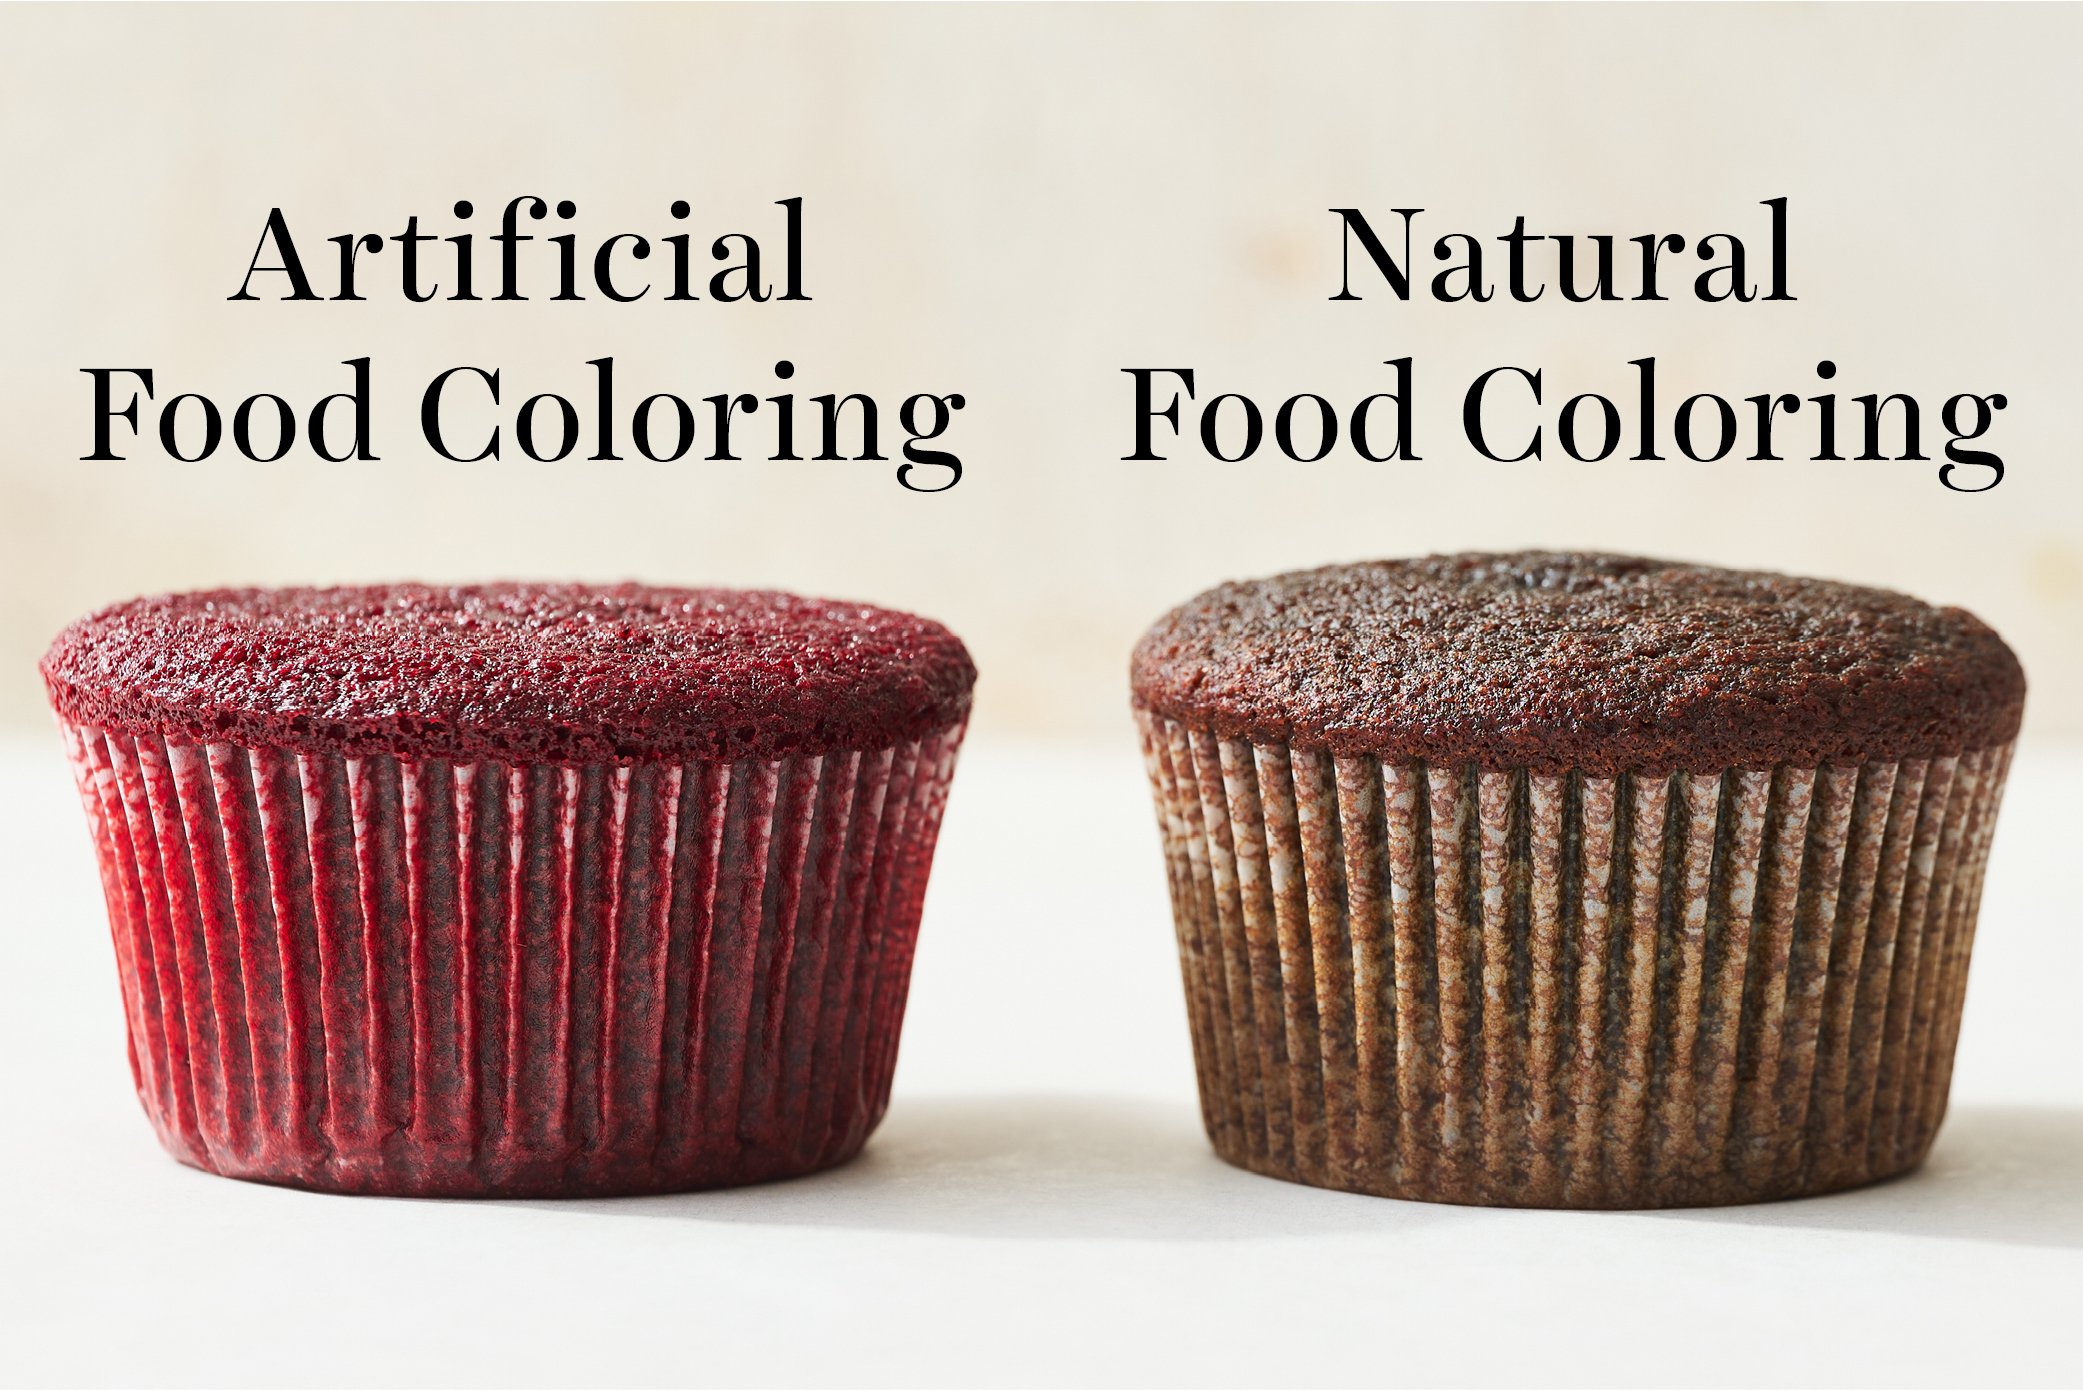 comparison of red velvet cupcakes made with artificial food coloring vs. natural food coloring.